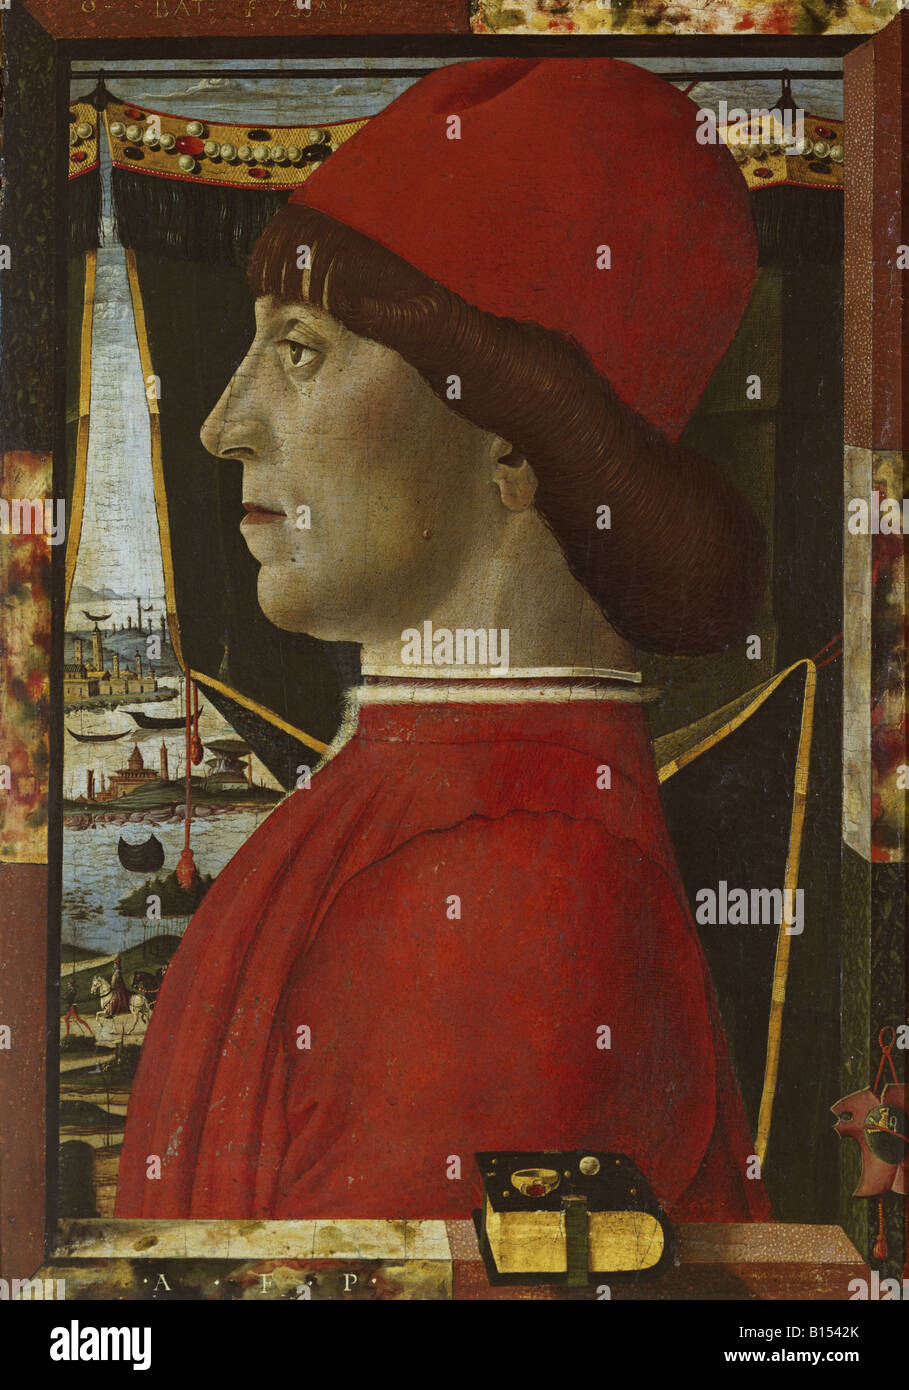 fine arts, Estense, Baldassare (1443 - 1504), painting, 'Portrait of a Nobleman', oil on panel, 51 cm x 37 cm, Correr museum, Venice, Italy, Artist's Copyright has not to be cleared Stock Photo